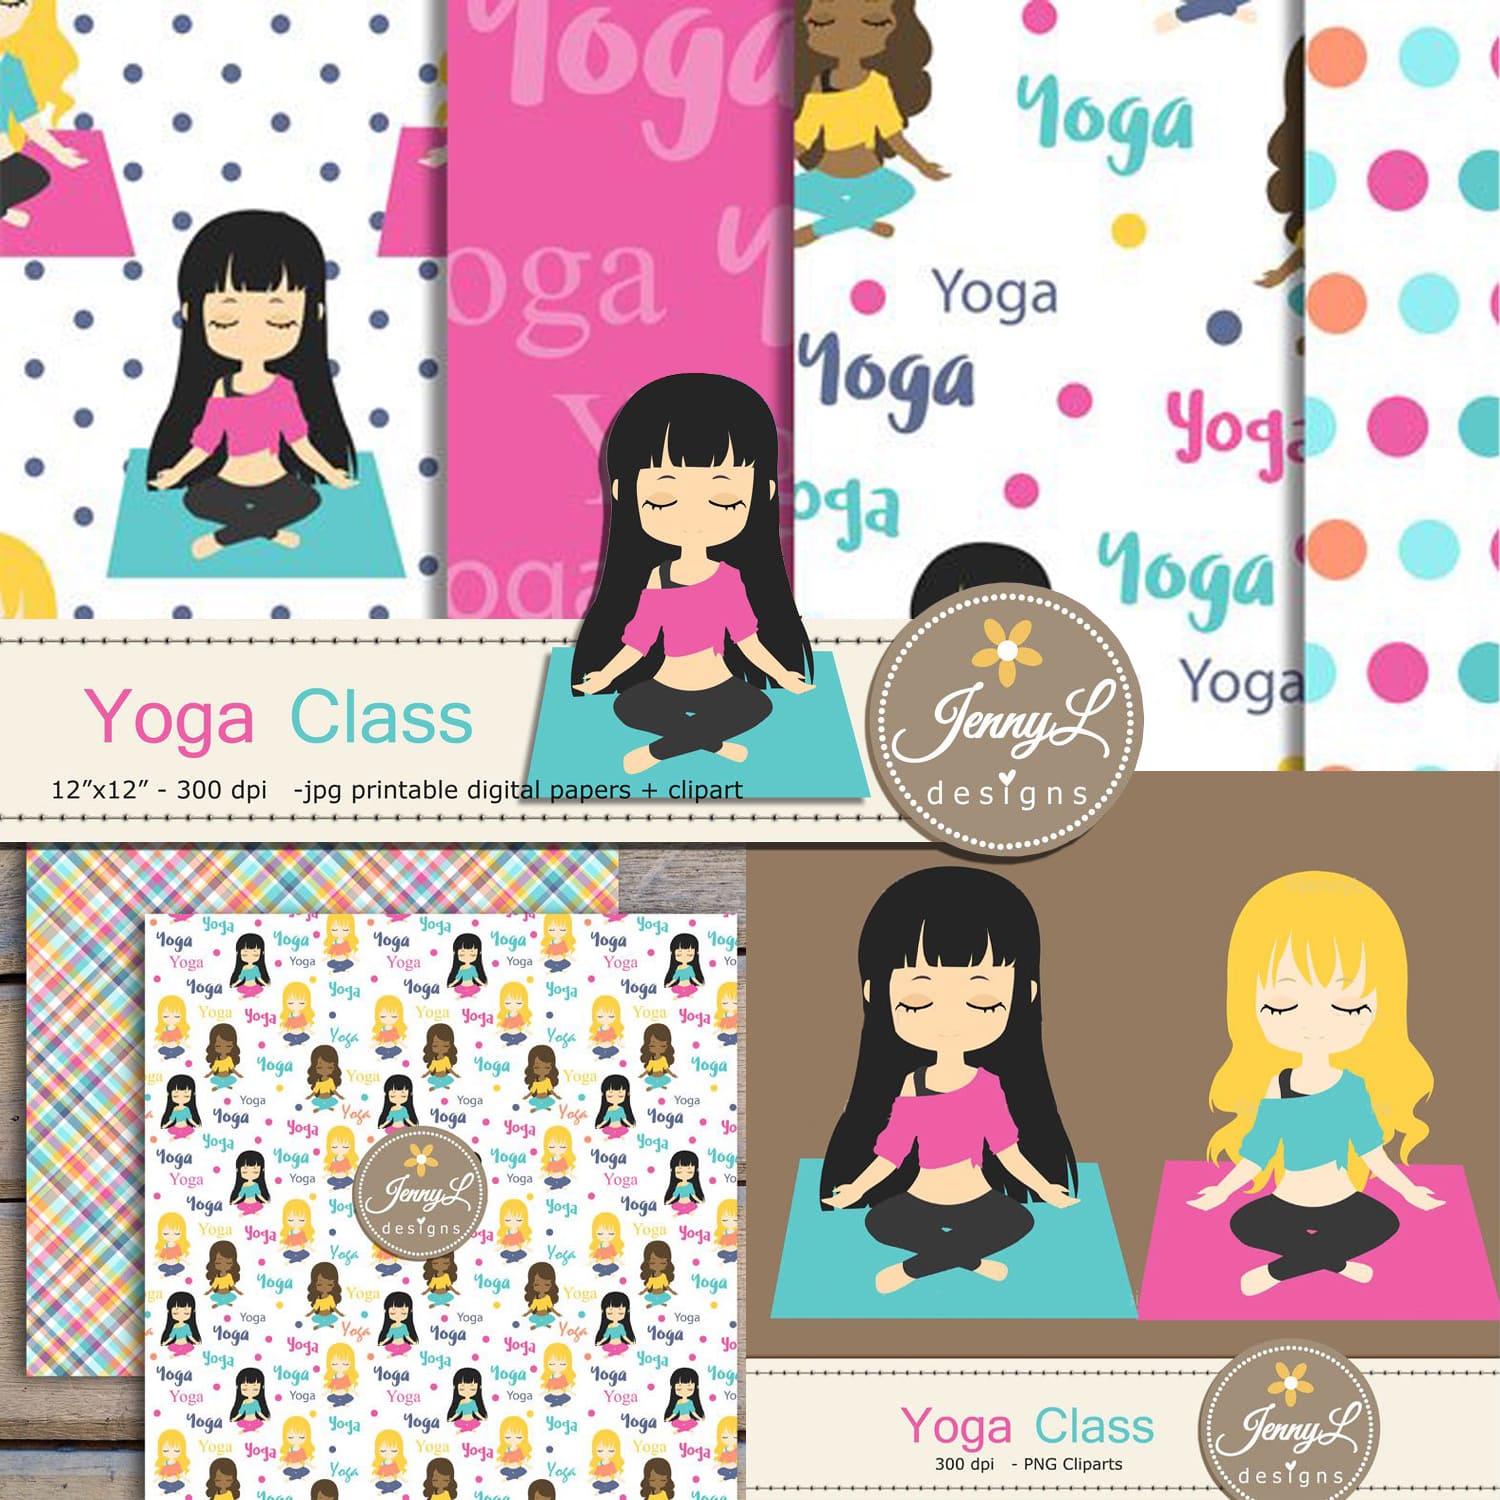 Yoga Digital Papers & Clipart created by JennyL Designs.